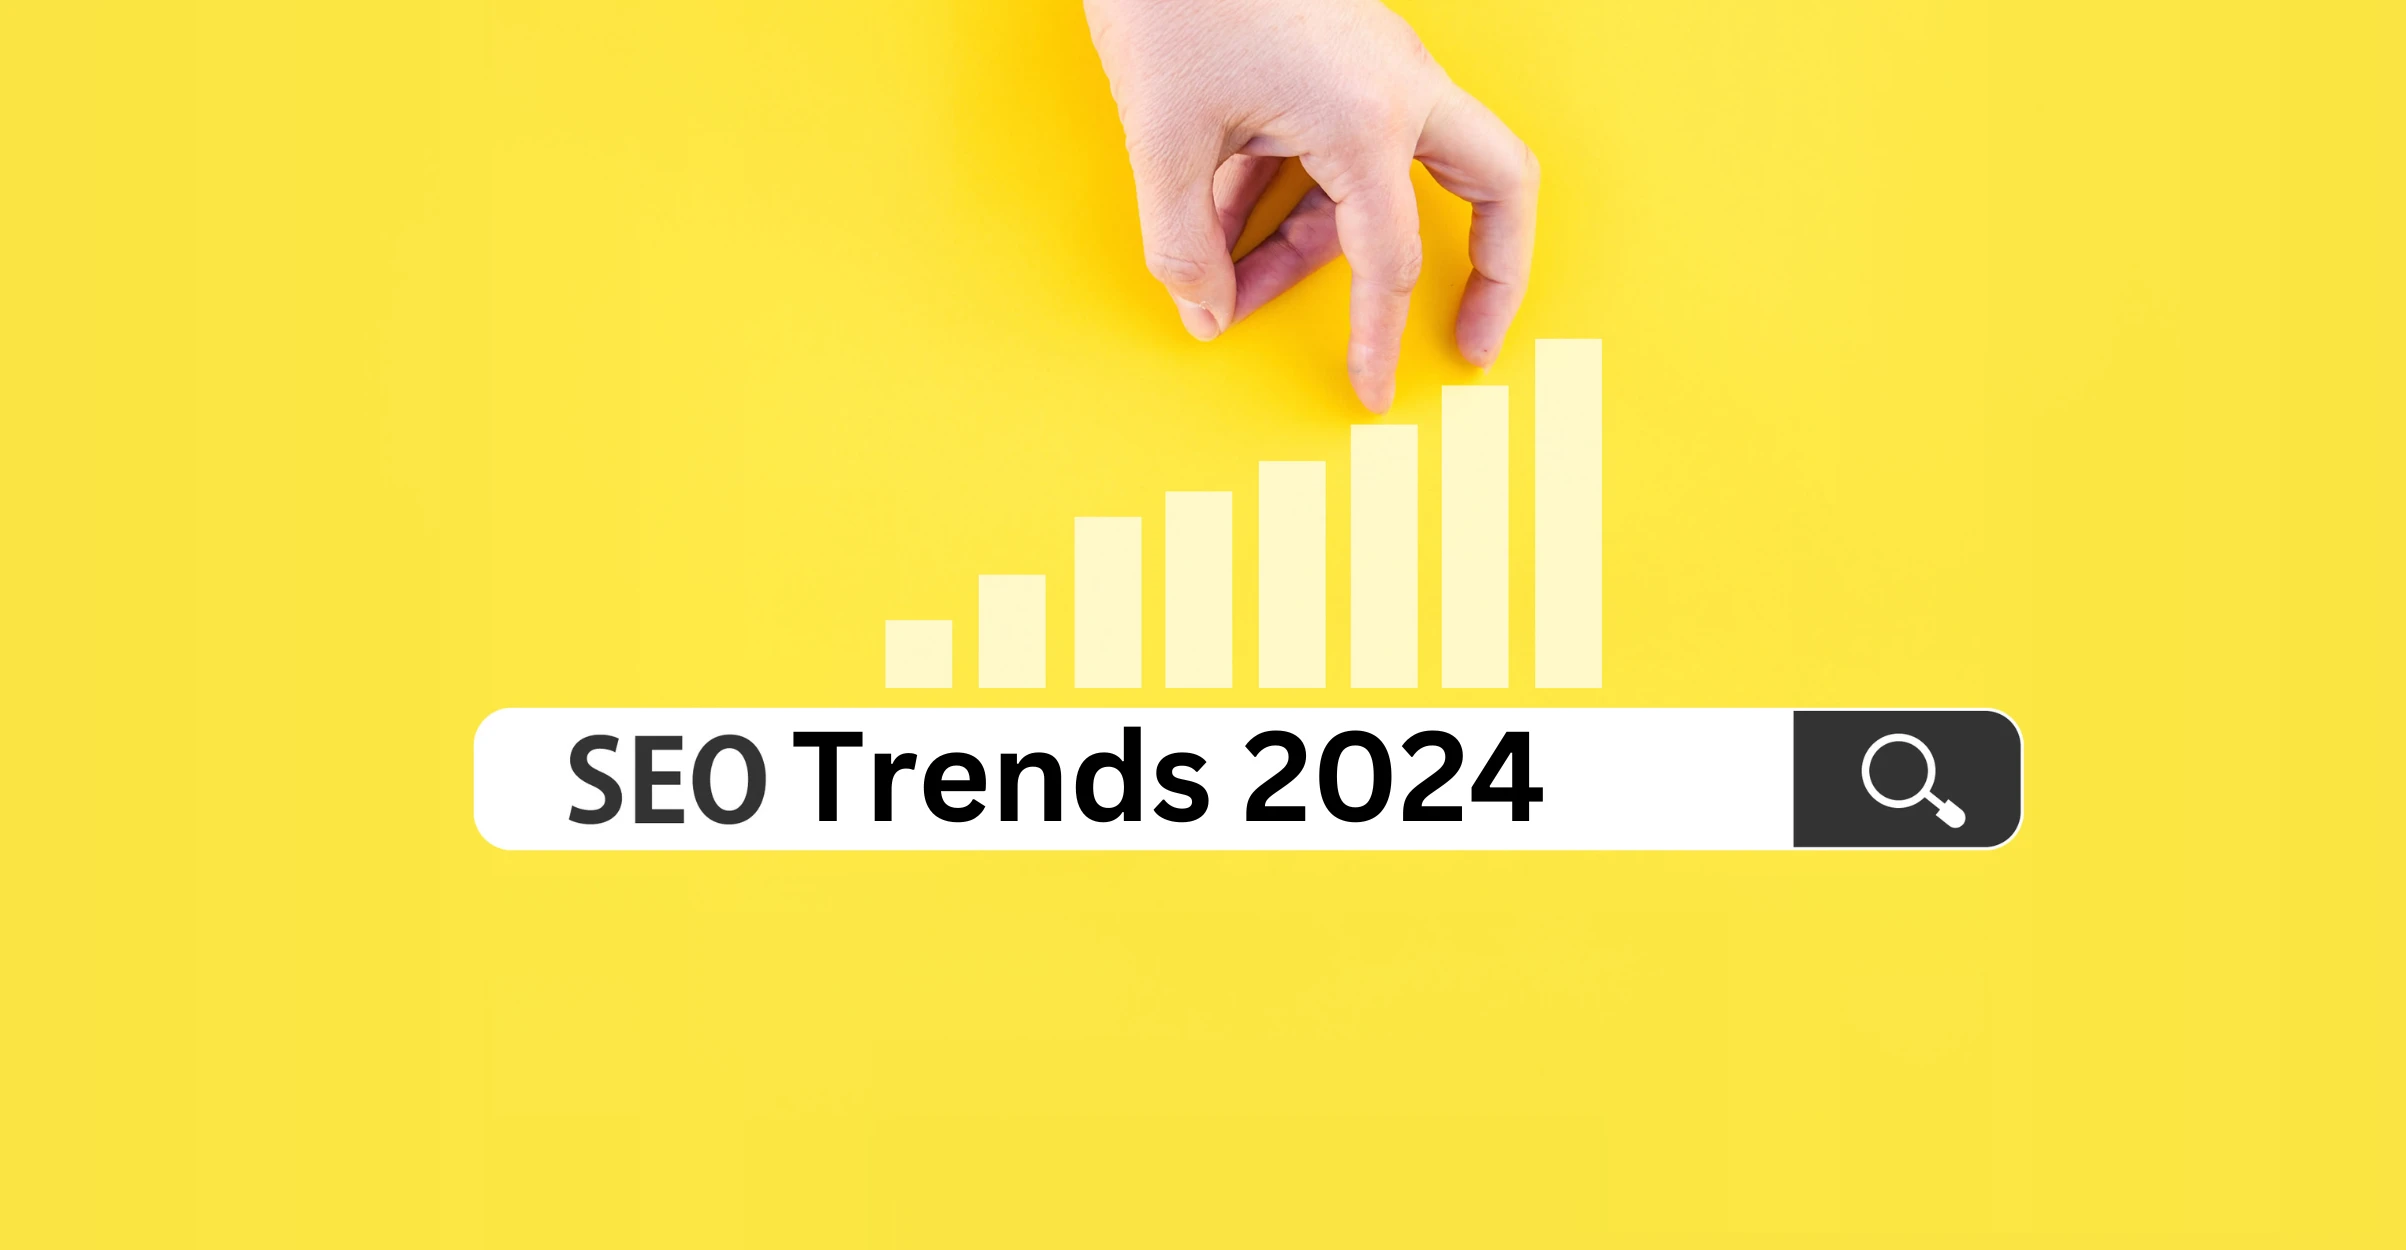 Top 5 SEO Trends to follow in 2024